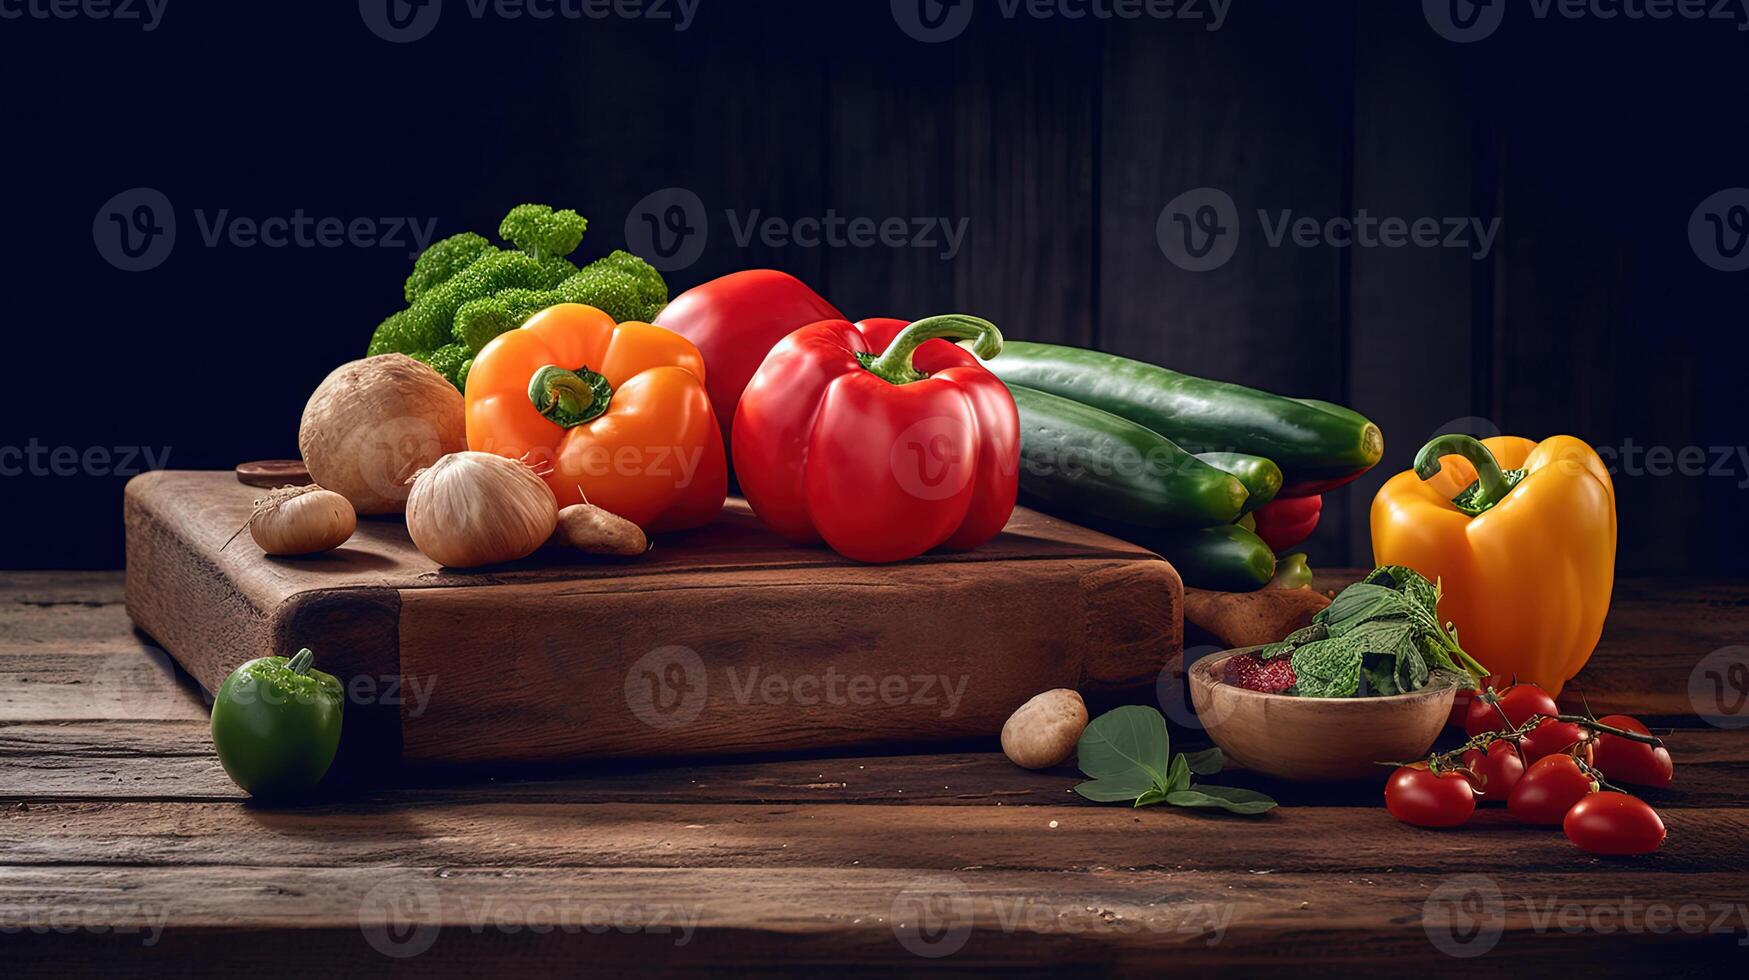 Healthy and Vegan Food Assortment of Fresh Vegetables on Wooden Cutting Board. Digital Illustration photo